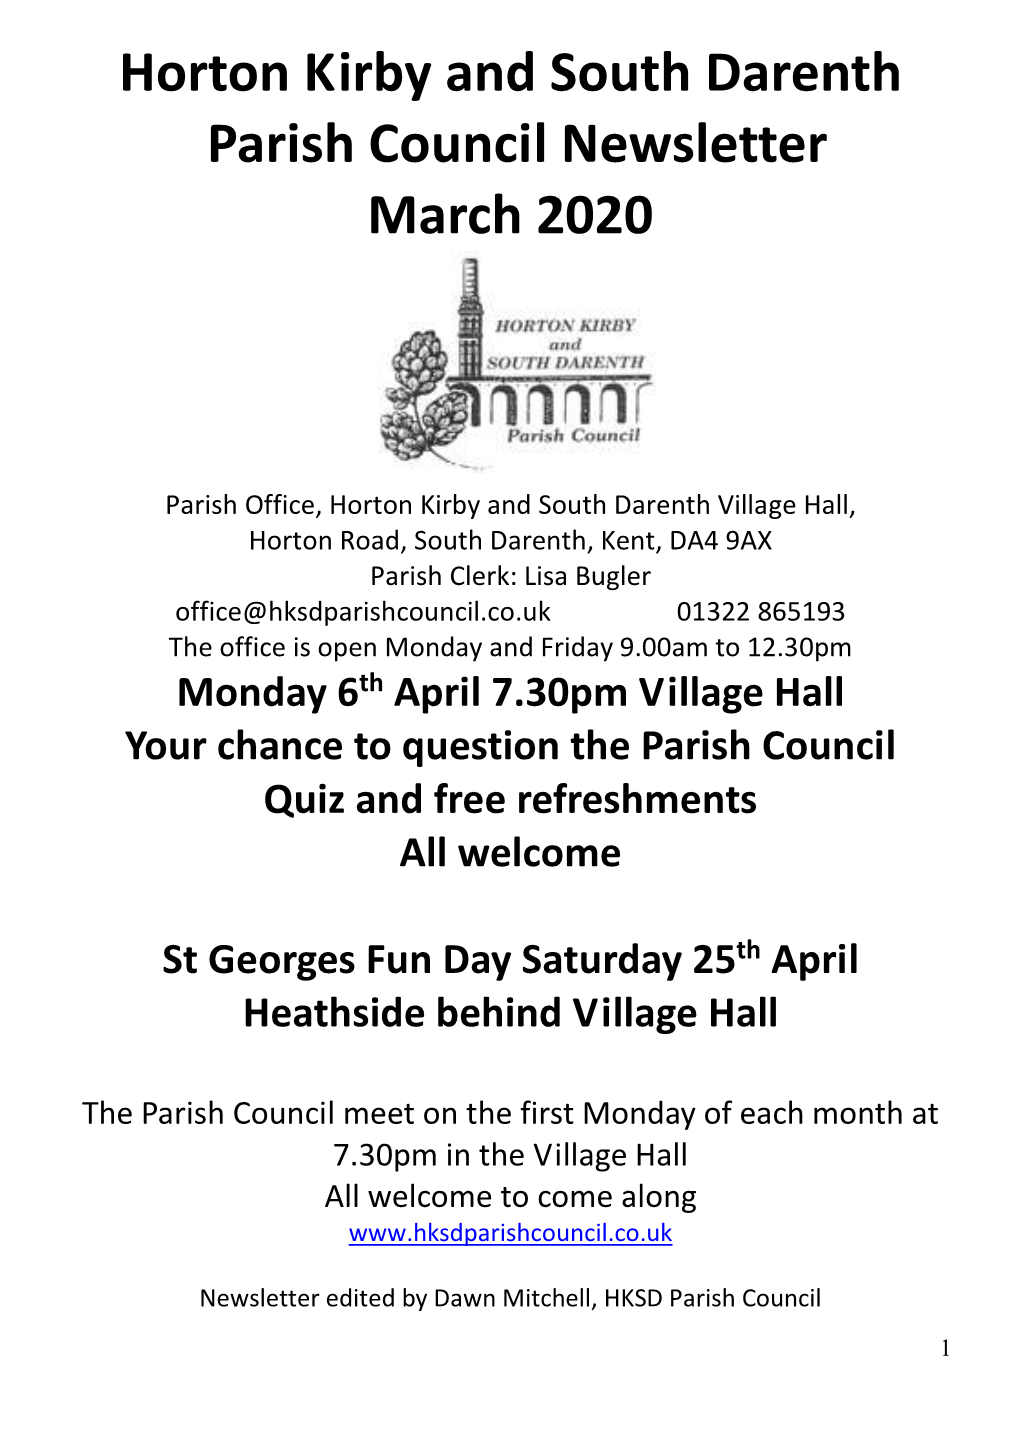 Horton Kirby and South Darenth Parish Council Newsletter March 2020